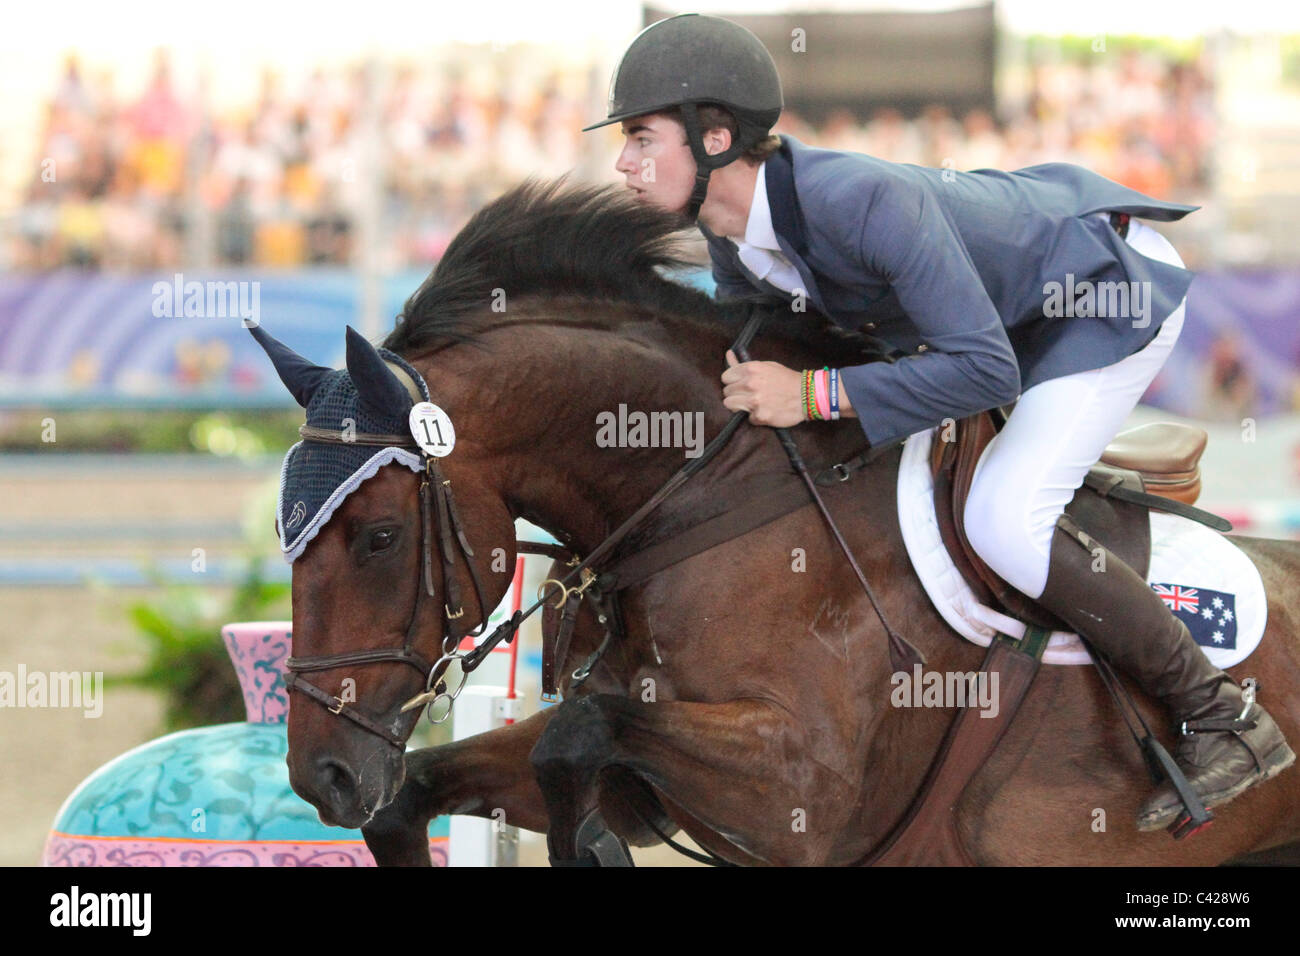 Thomas McDermott of Australia riding HUGO during the 2010 Singapore Youth Olympic Games Equestrian Jumping Individual Round B. Stock Photo